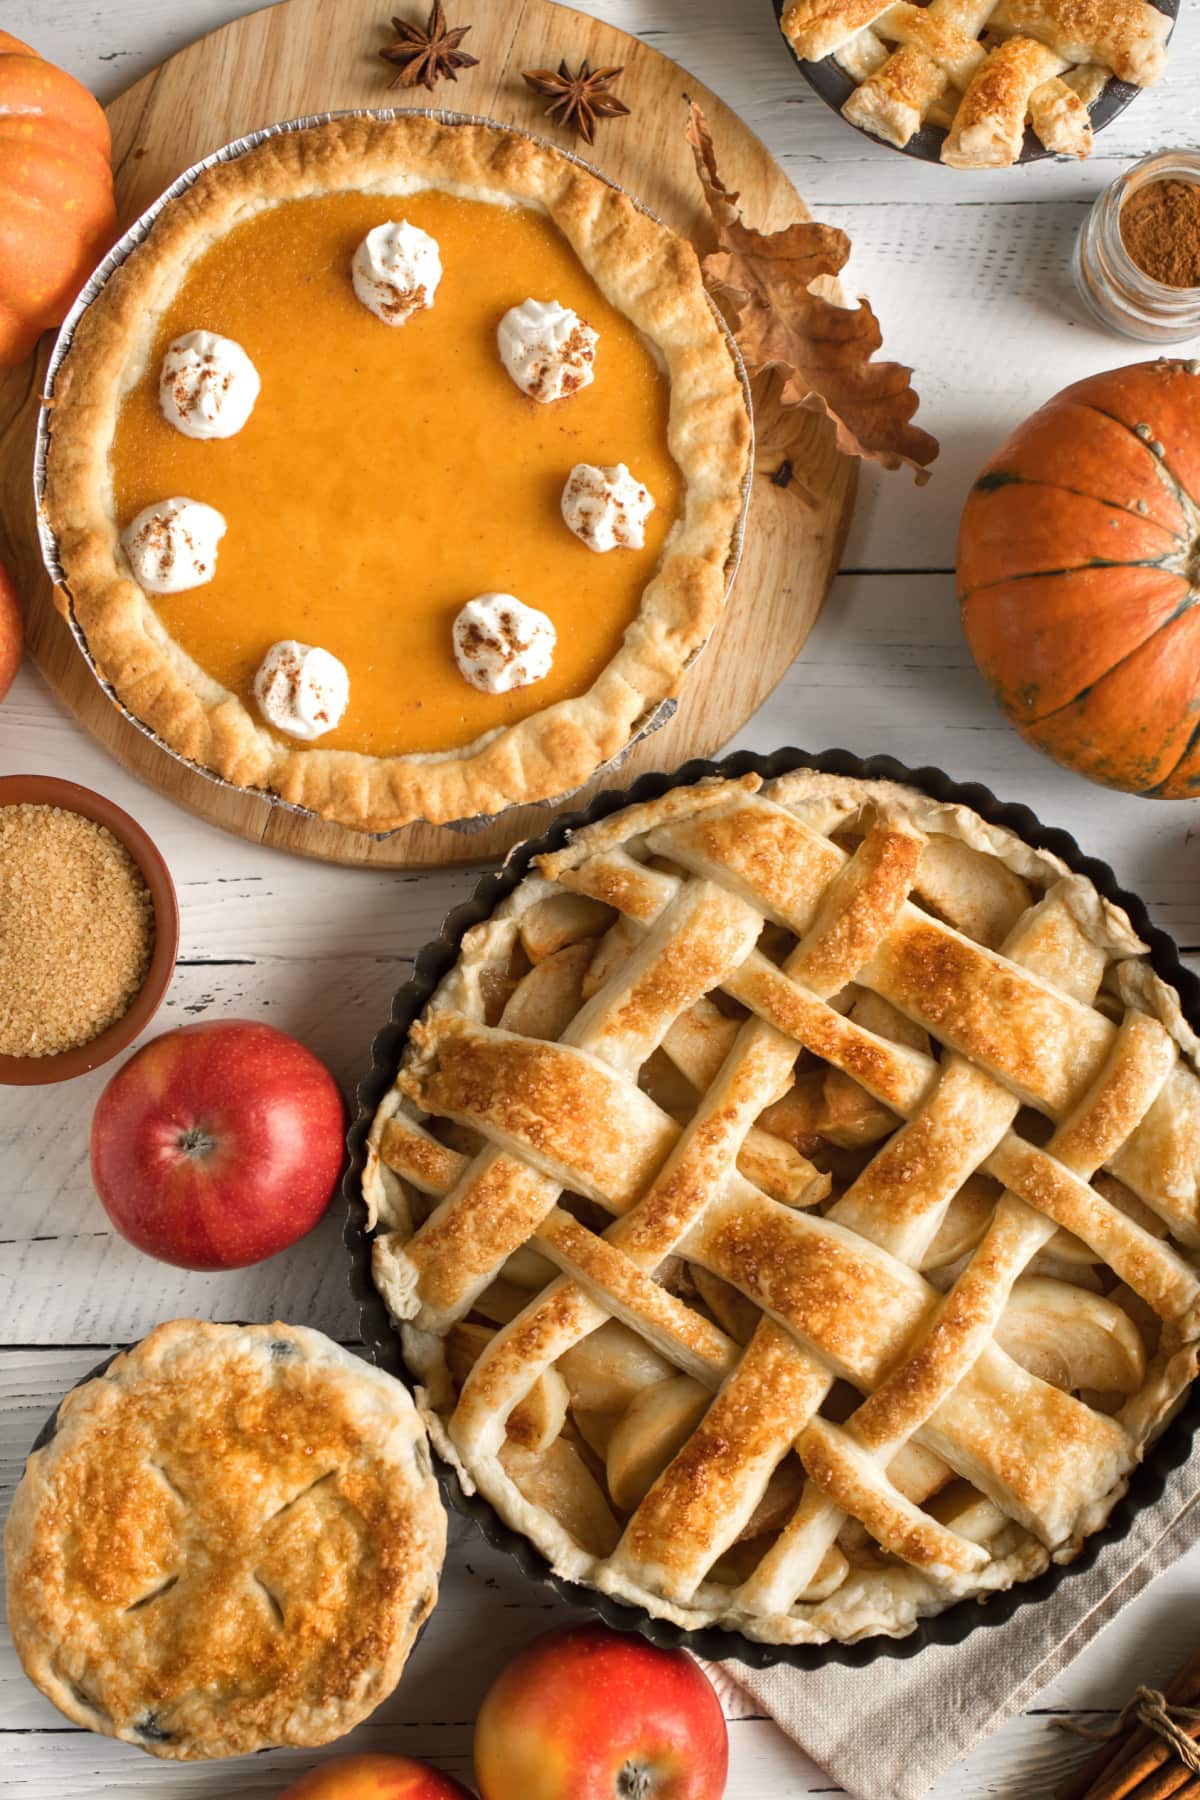 Pie vs. Tart- What's The Difference? (+ Easy Crust Recipe) featuring a Fall Table Scape with Pumpkin Pie with Whipped Cream, Lattice-Crusted Apple Pie, and a Mini Pie with Sugar, Apples, and Pumpkins Around